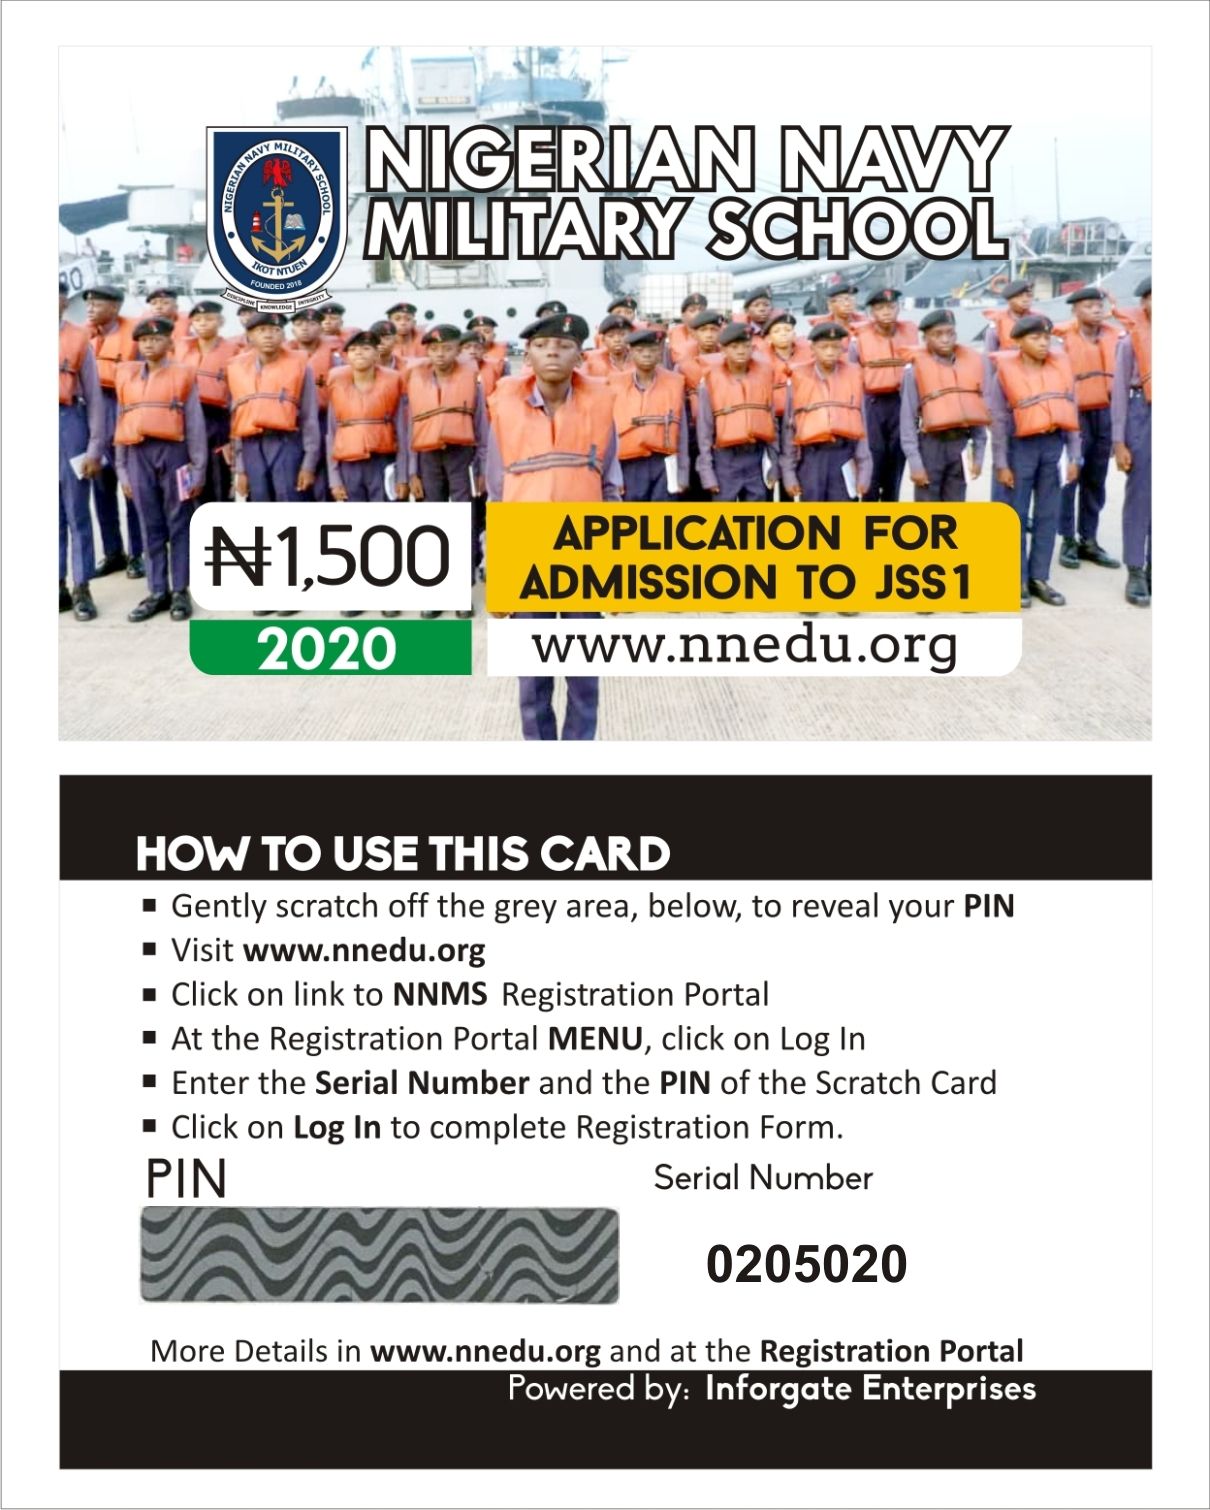 CONTACT BUKOLA ON 09099355873 TO PRINT PORTAL ACCESS SCRATCH CARDS